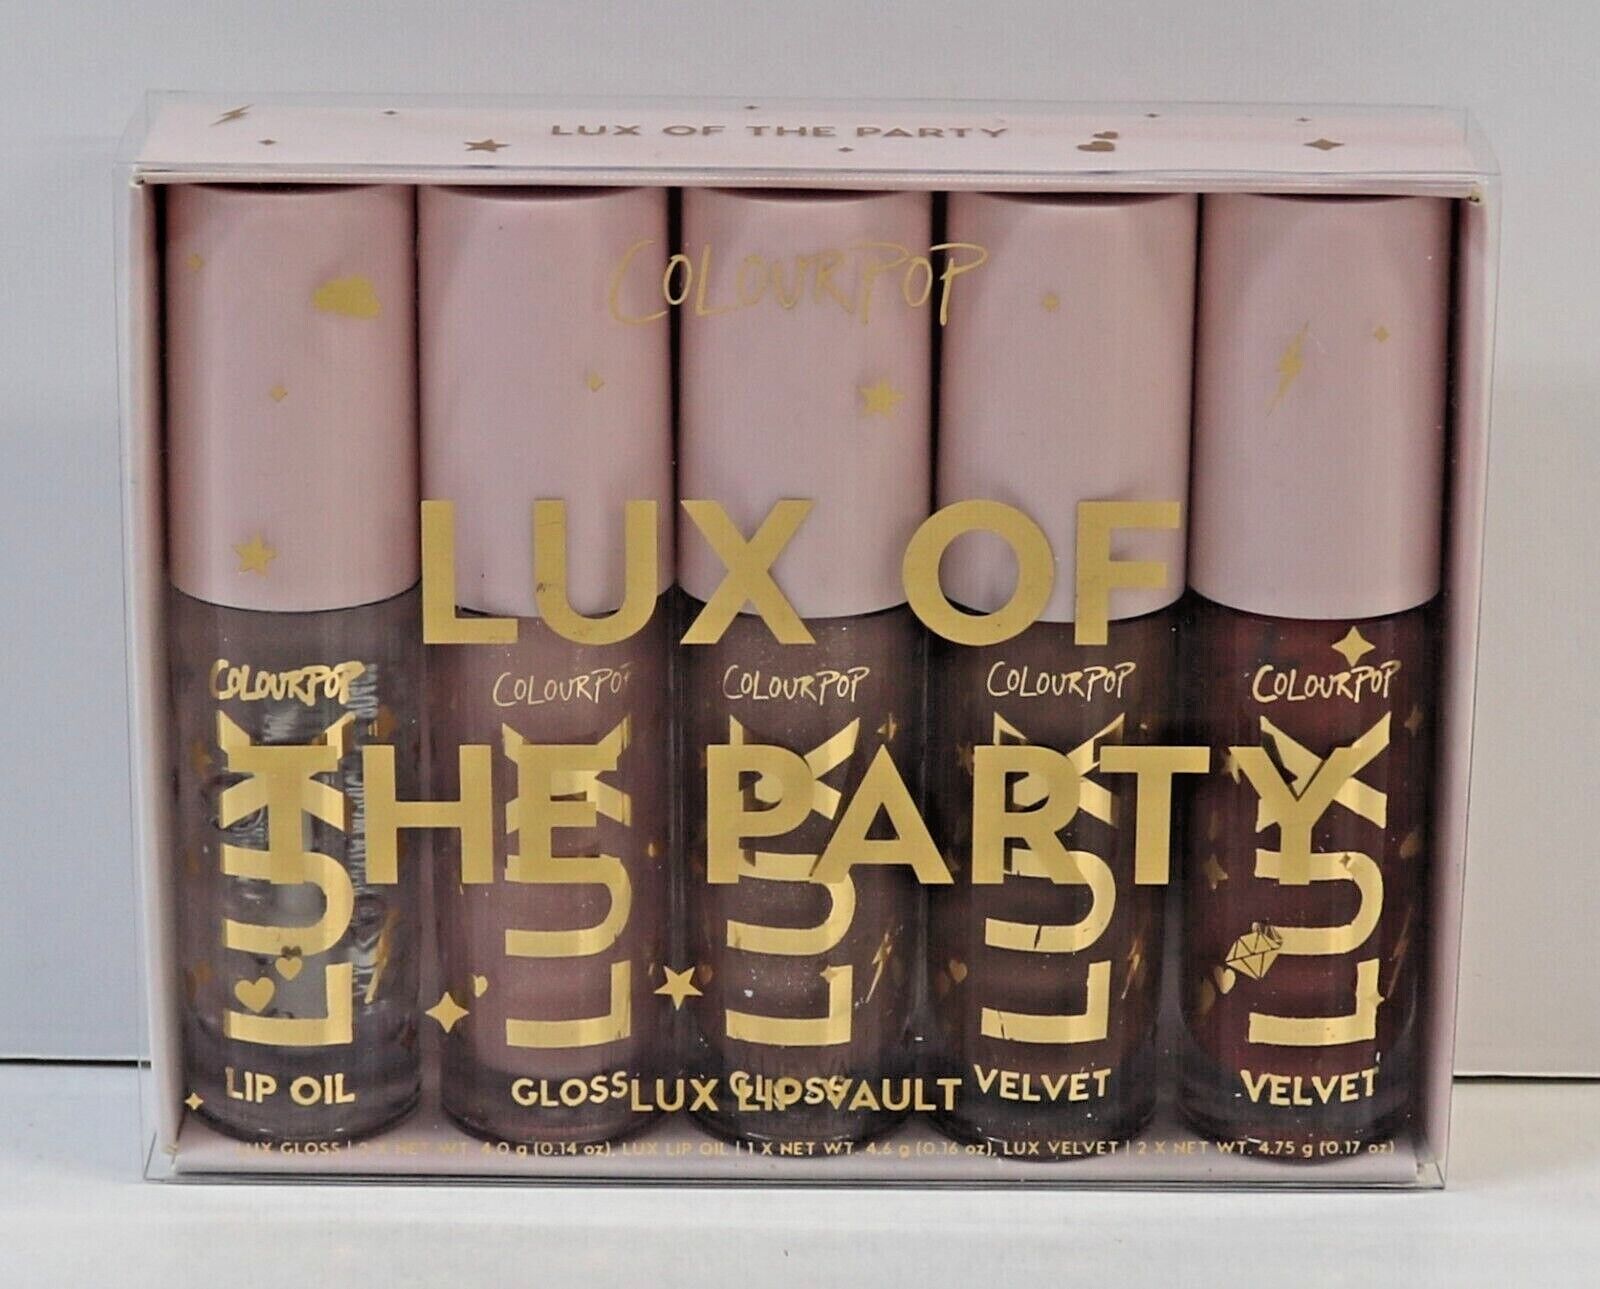 5 pc Set Colourpop LUX OF THE PARTY Lux Lip Vault Kit Brand-New Free Shipping! - $29.75